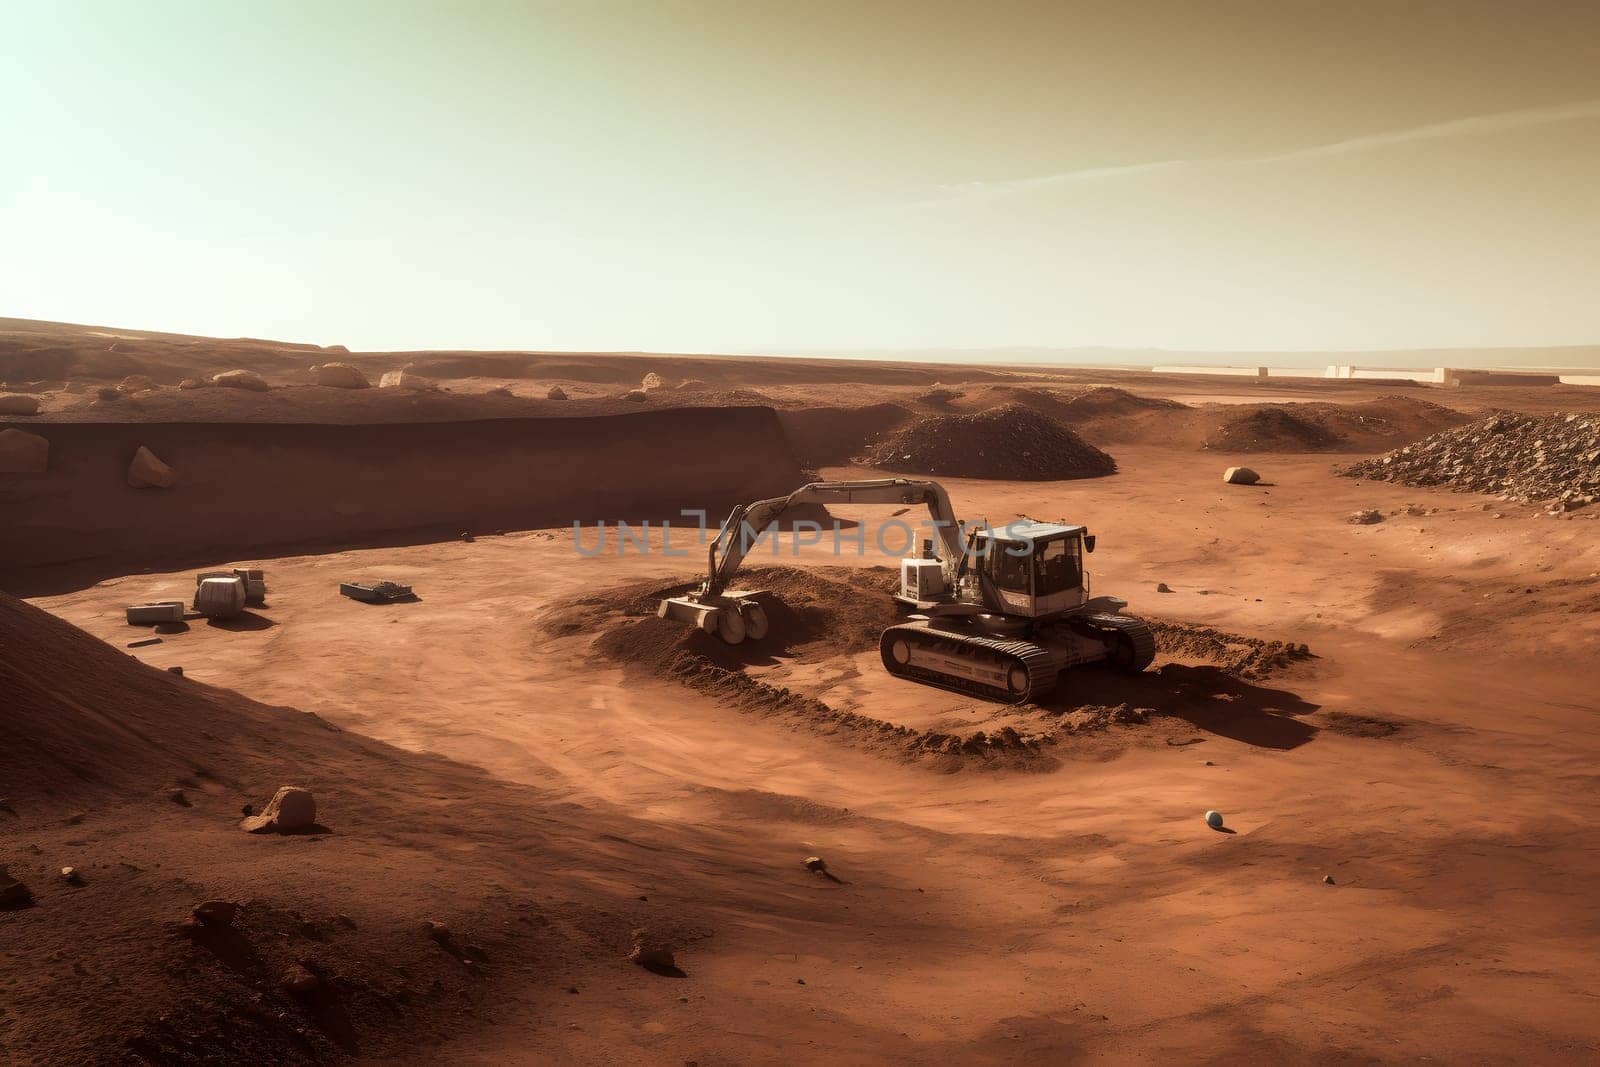 construction site on Mars planet surface, neural network generated photorealistic image by z1b